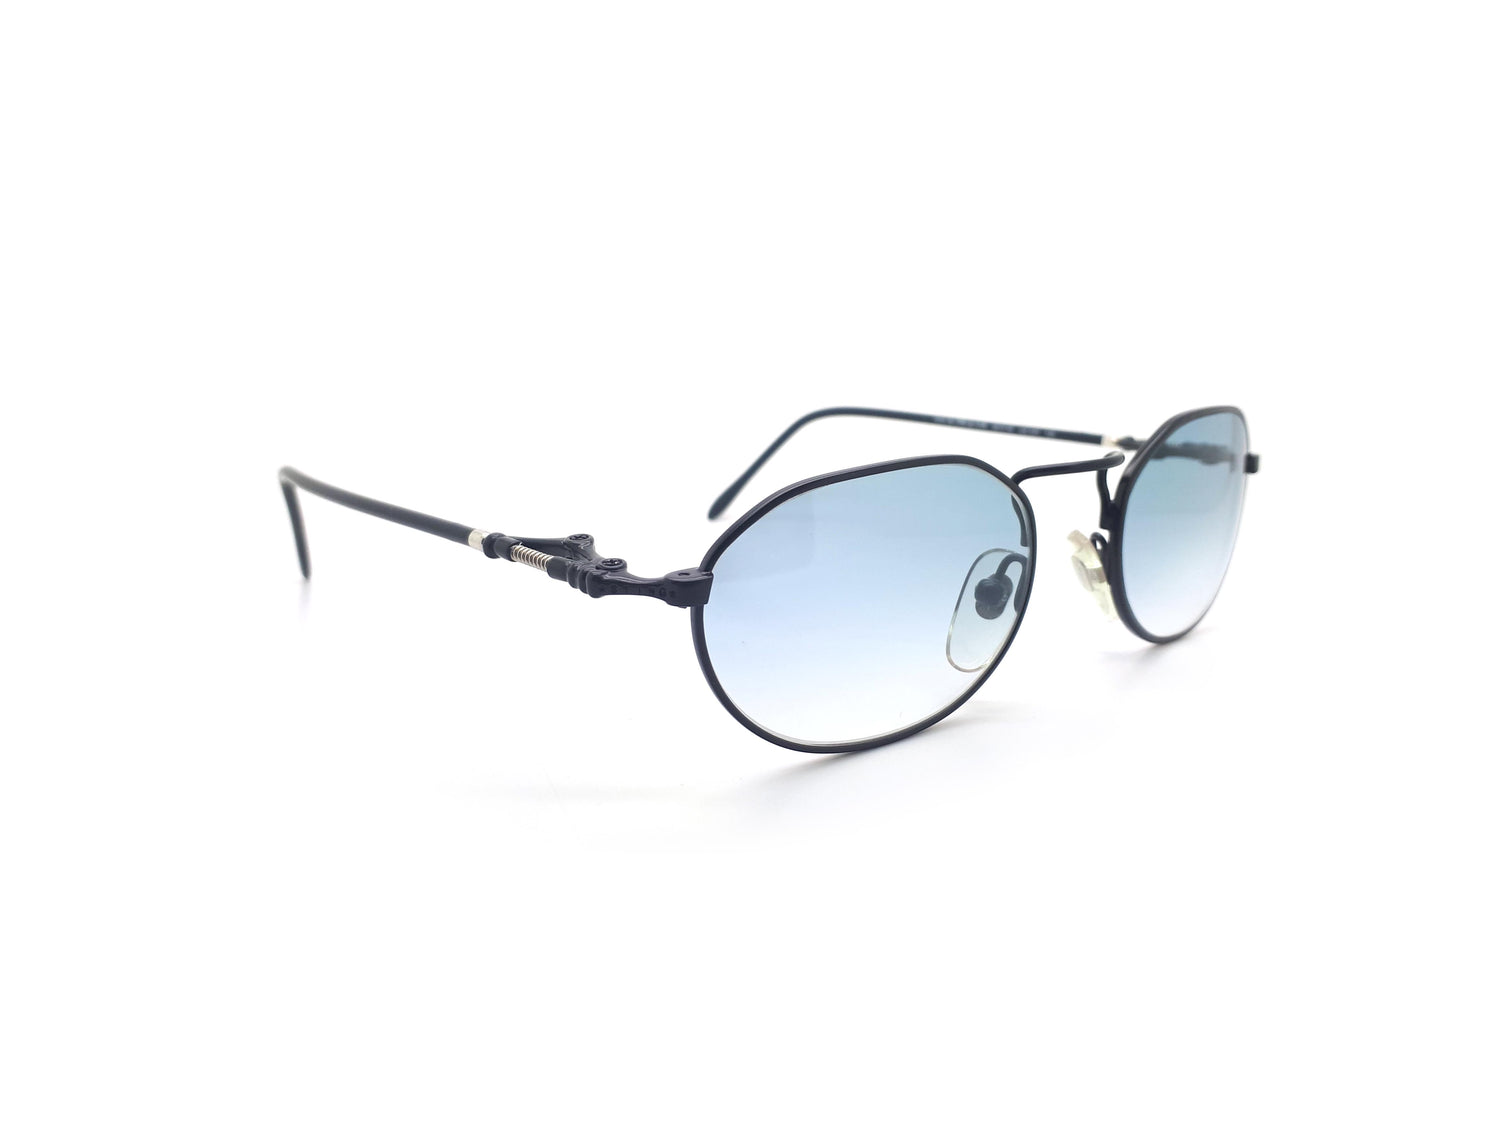 Sting vintage sunglasses with spring hinges